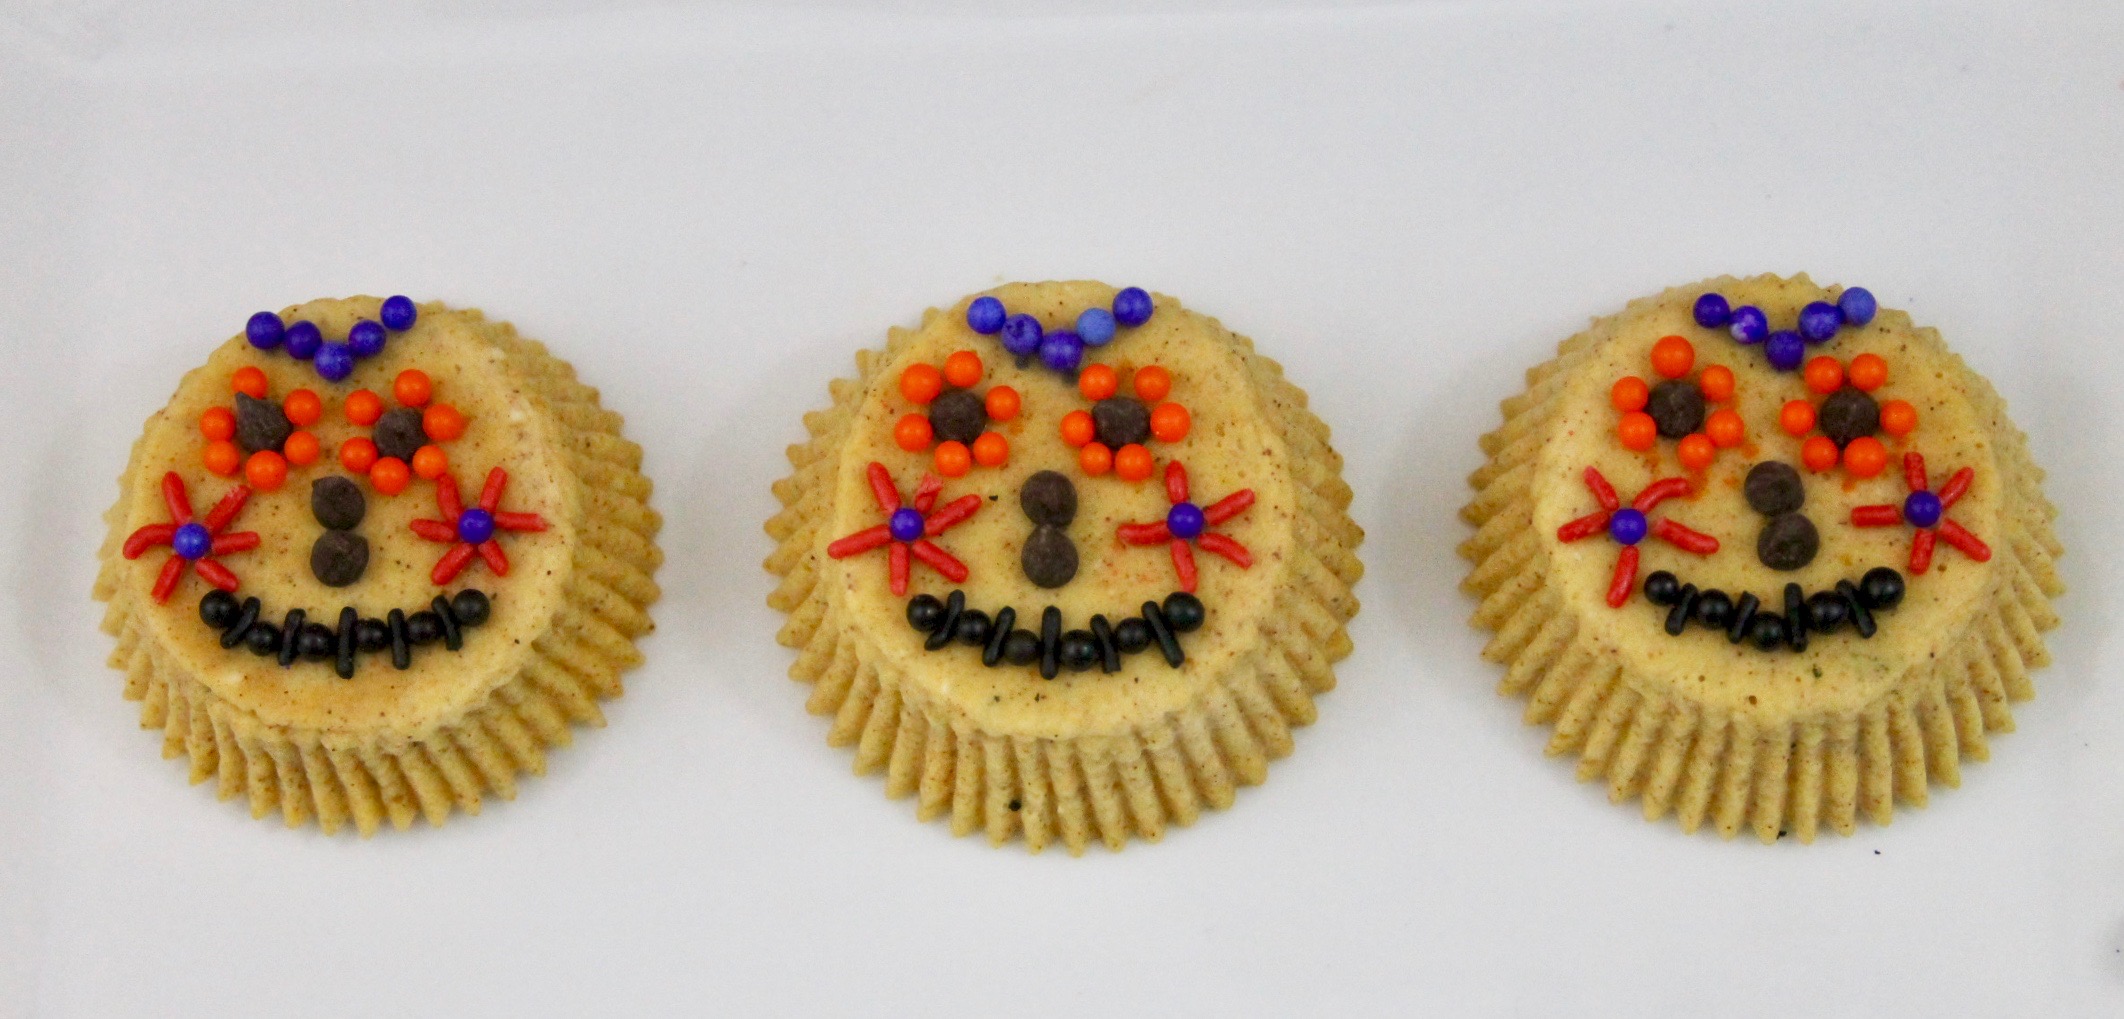 These pumpkin spice cheesecake skulls are a fun and delicious Dia de los Muertos treat to make and enjoy with family. 